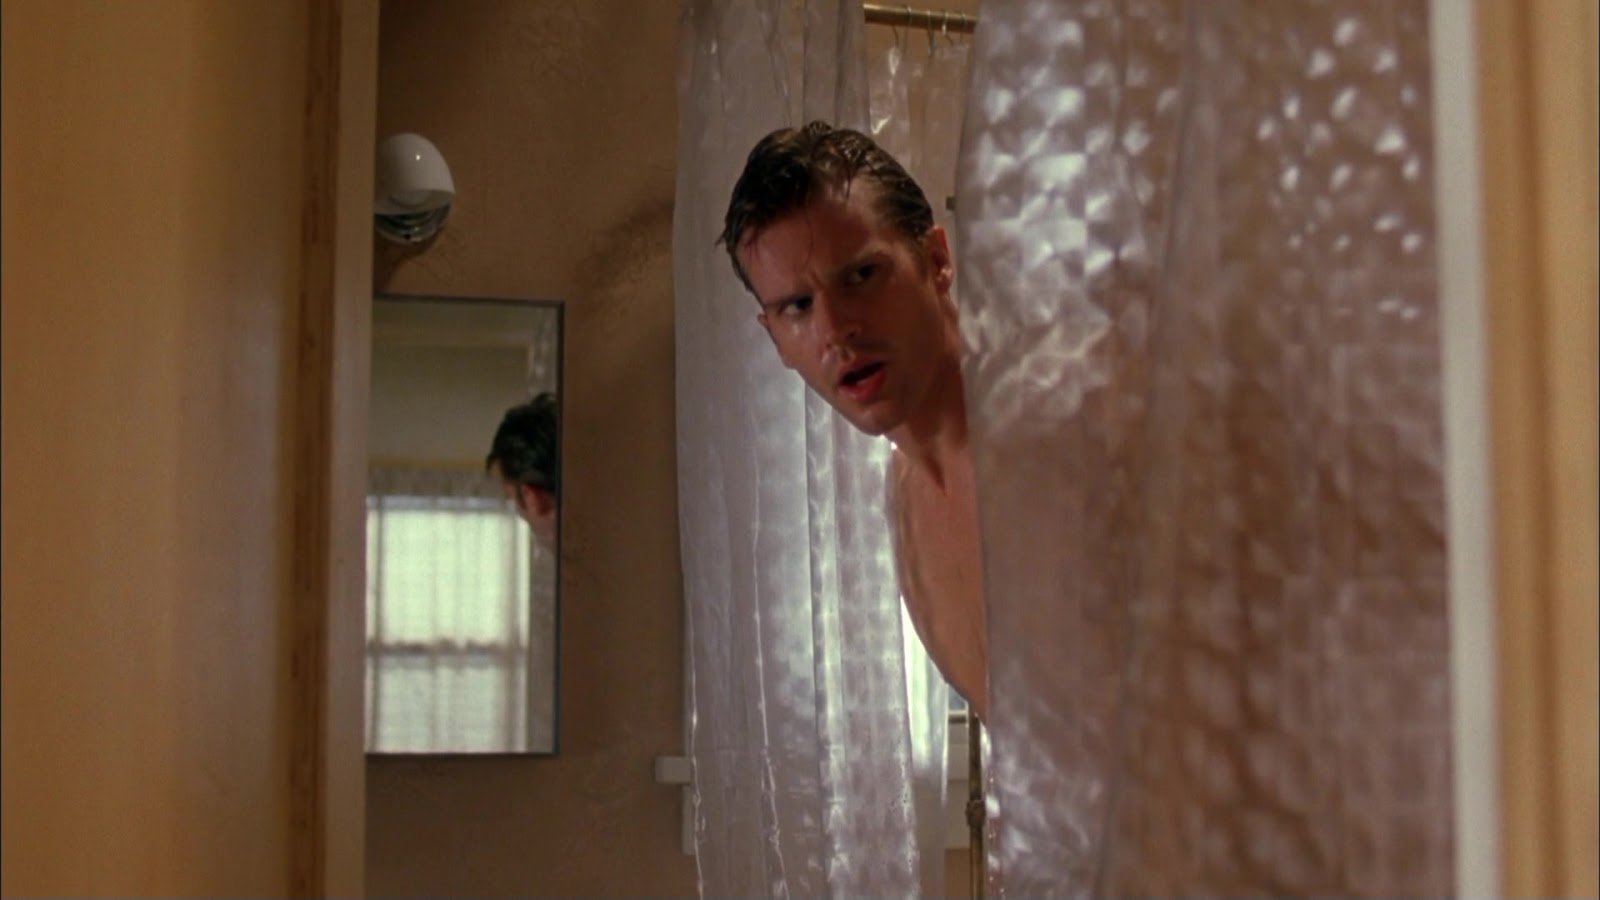 Cary Elwes nude in The Crush.